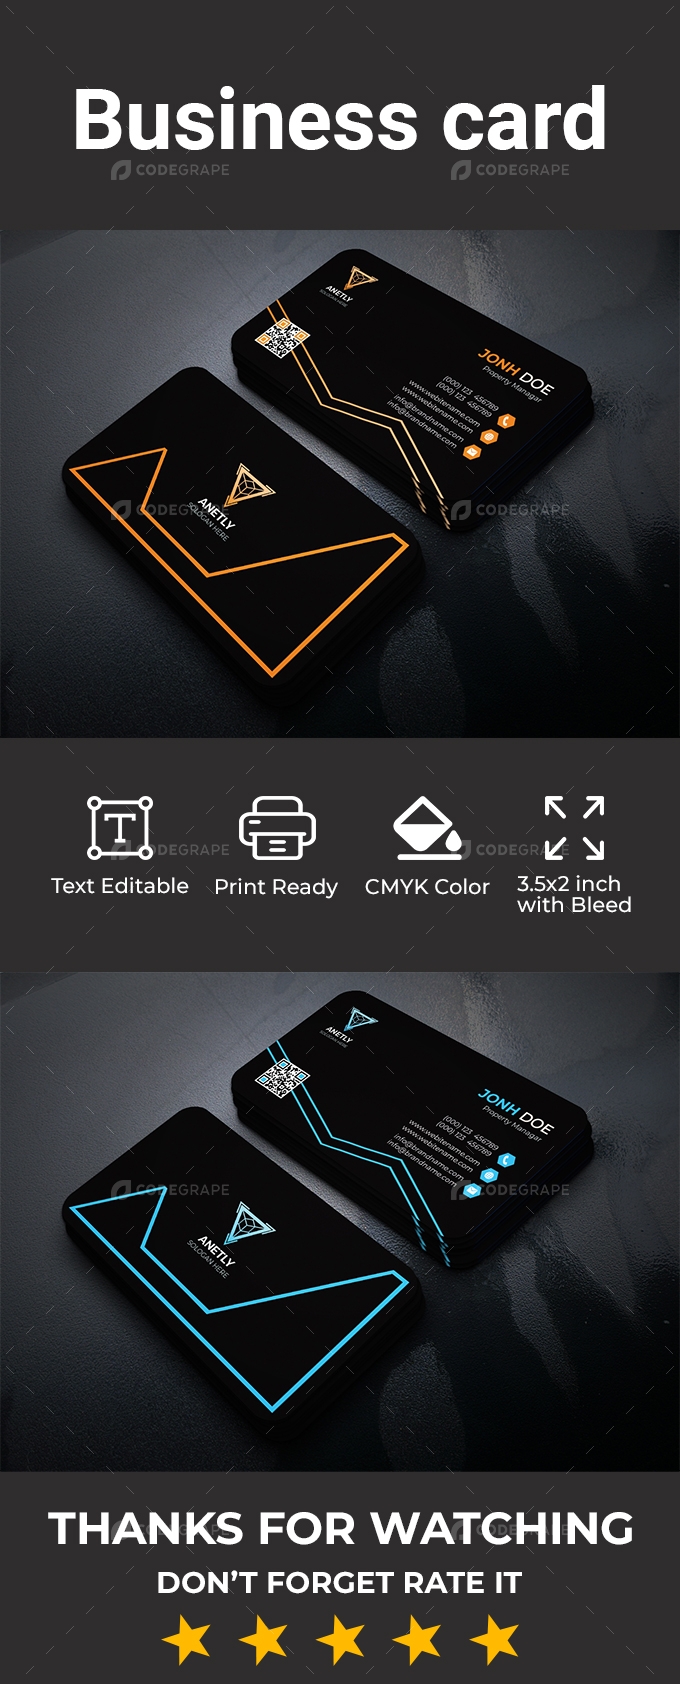 Business Card Template